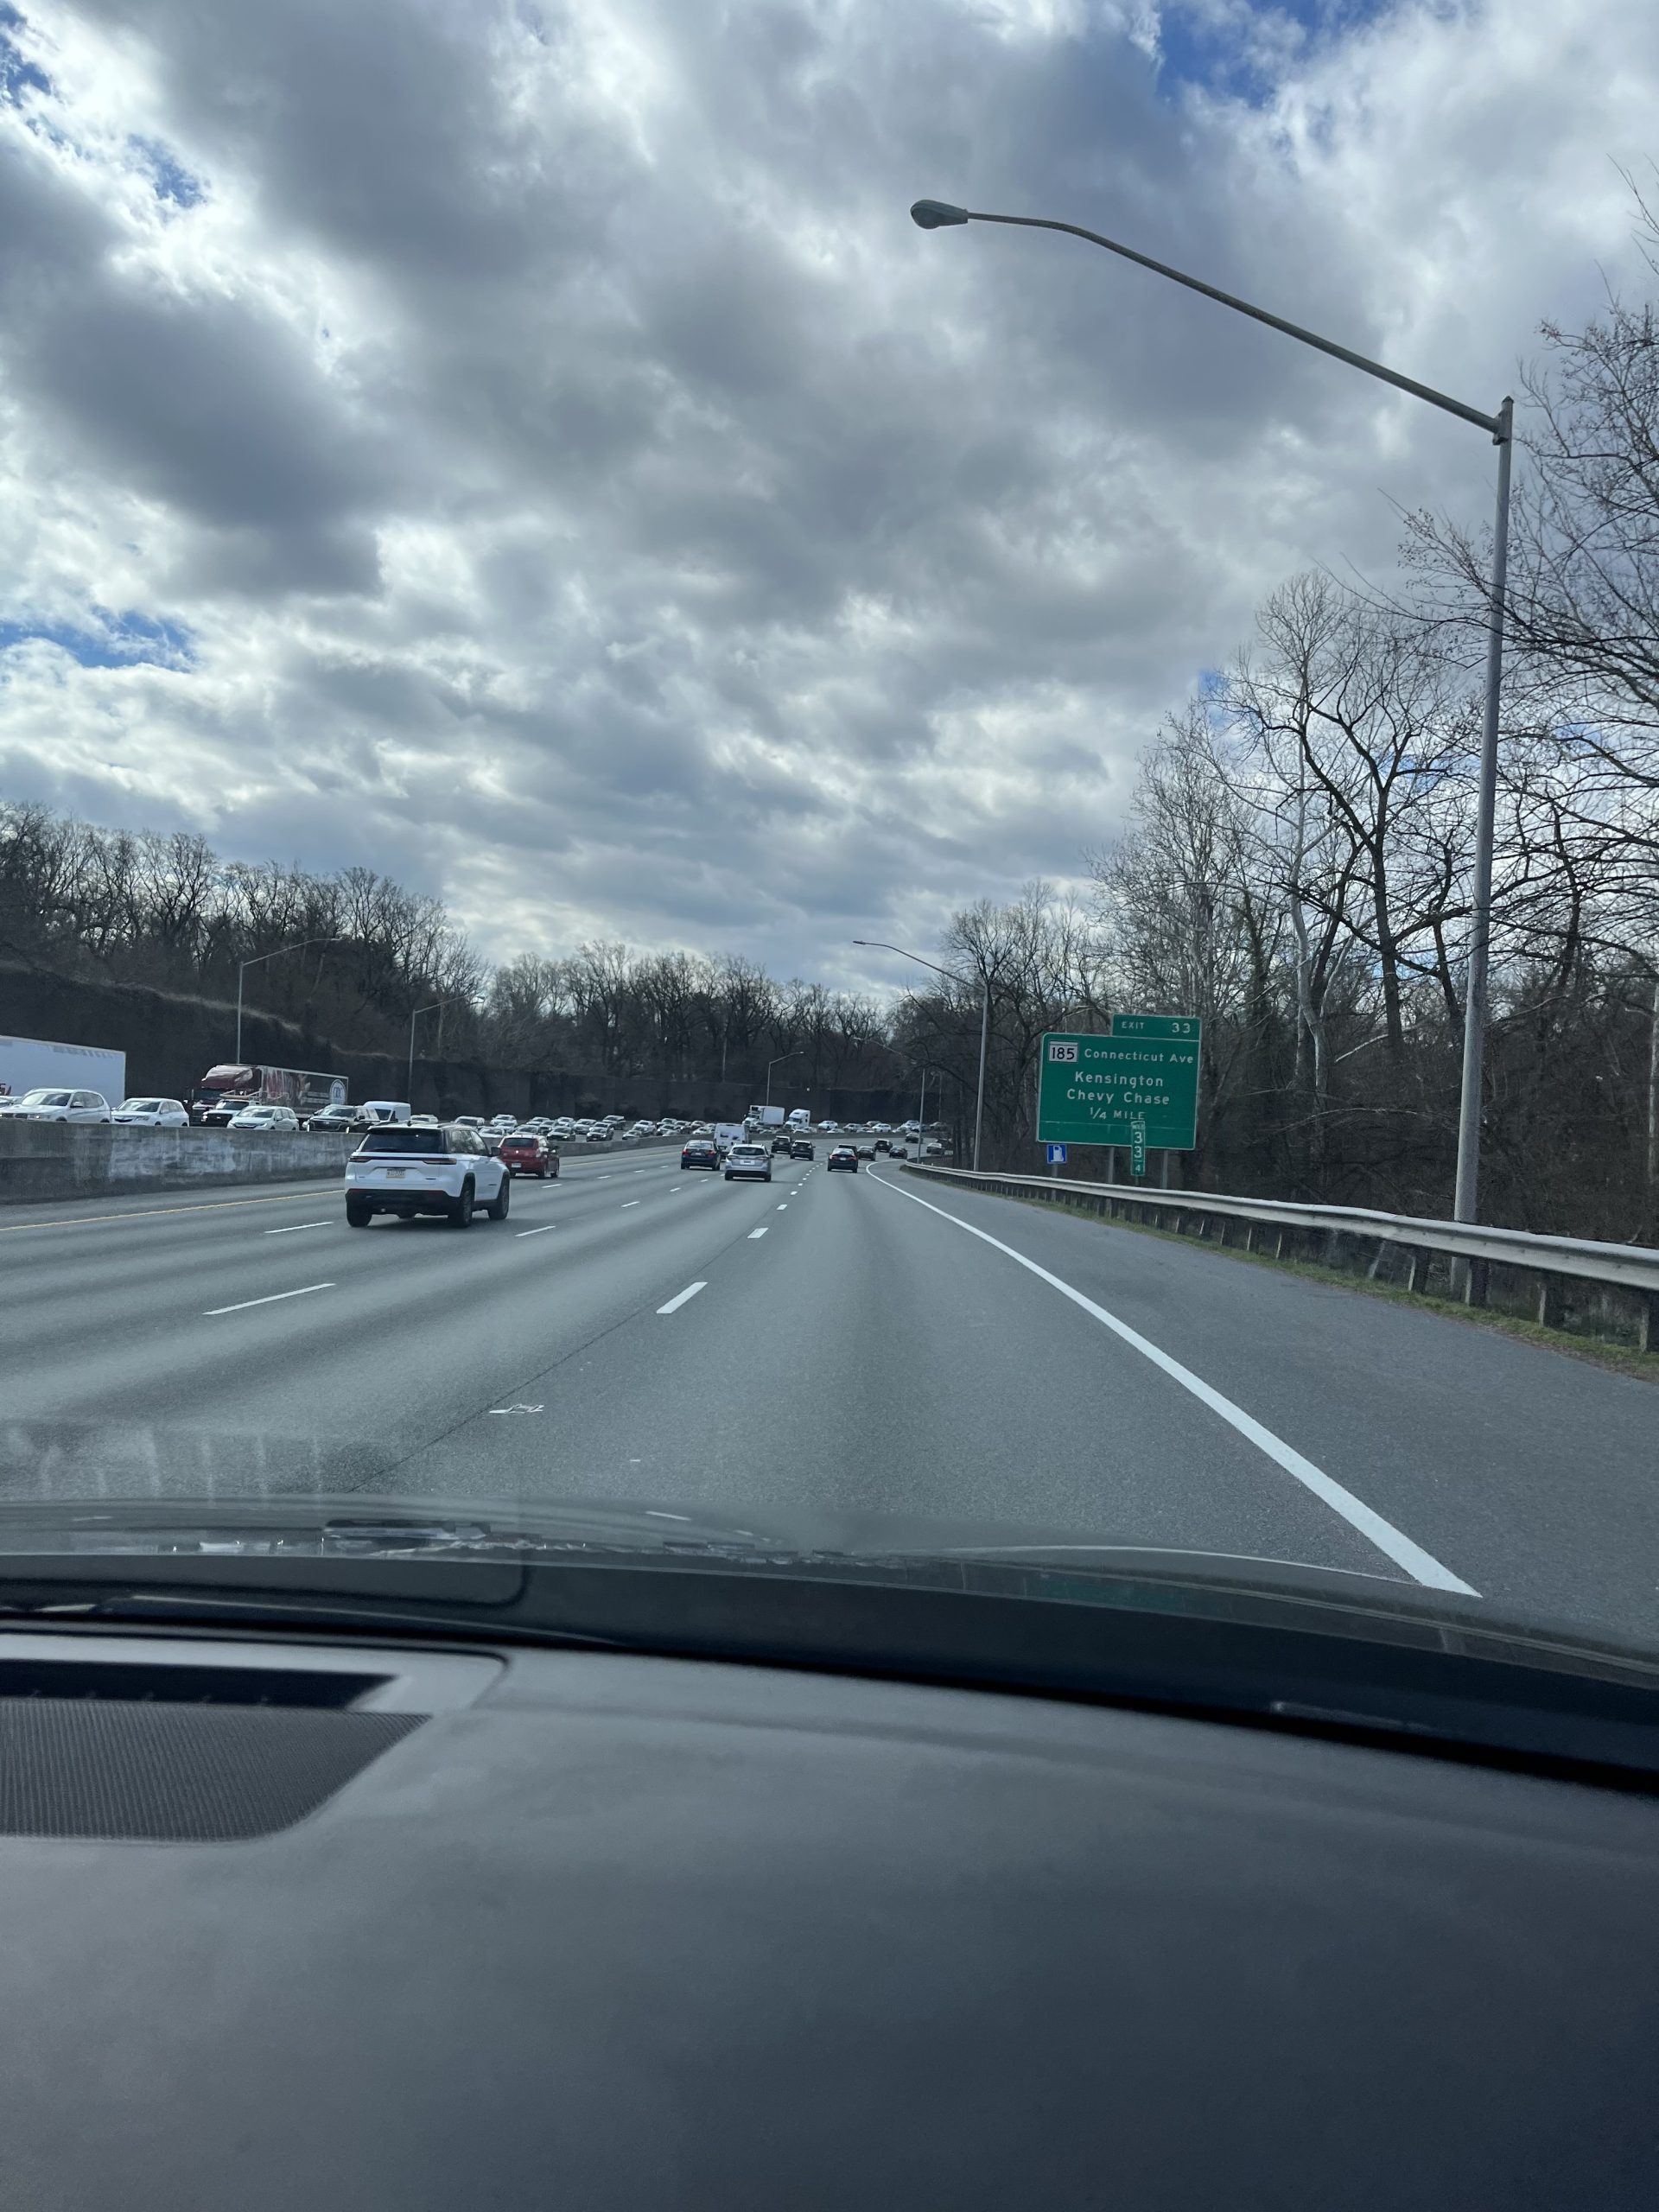 Cars whiz towards the Connecticut Avenue exit on 495 East, with speeds generally ranging anywhere from 40-80 mph.